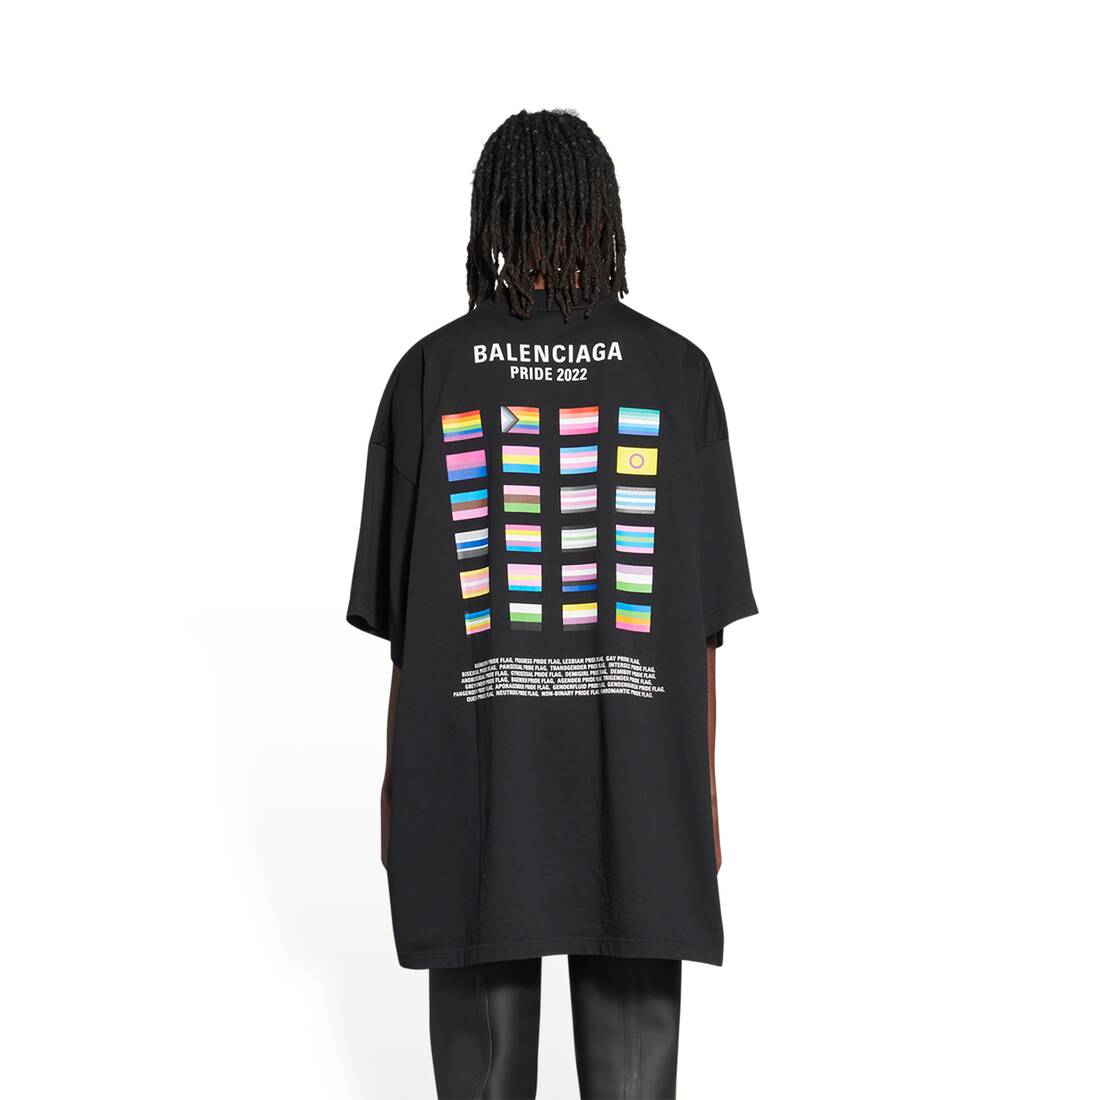 Display zoomed version of pride 22 t-shirt oversized 3